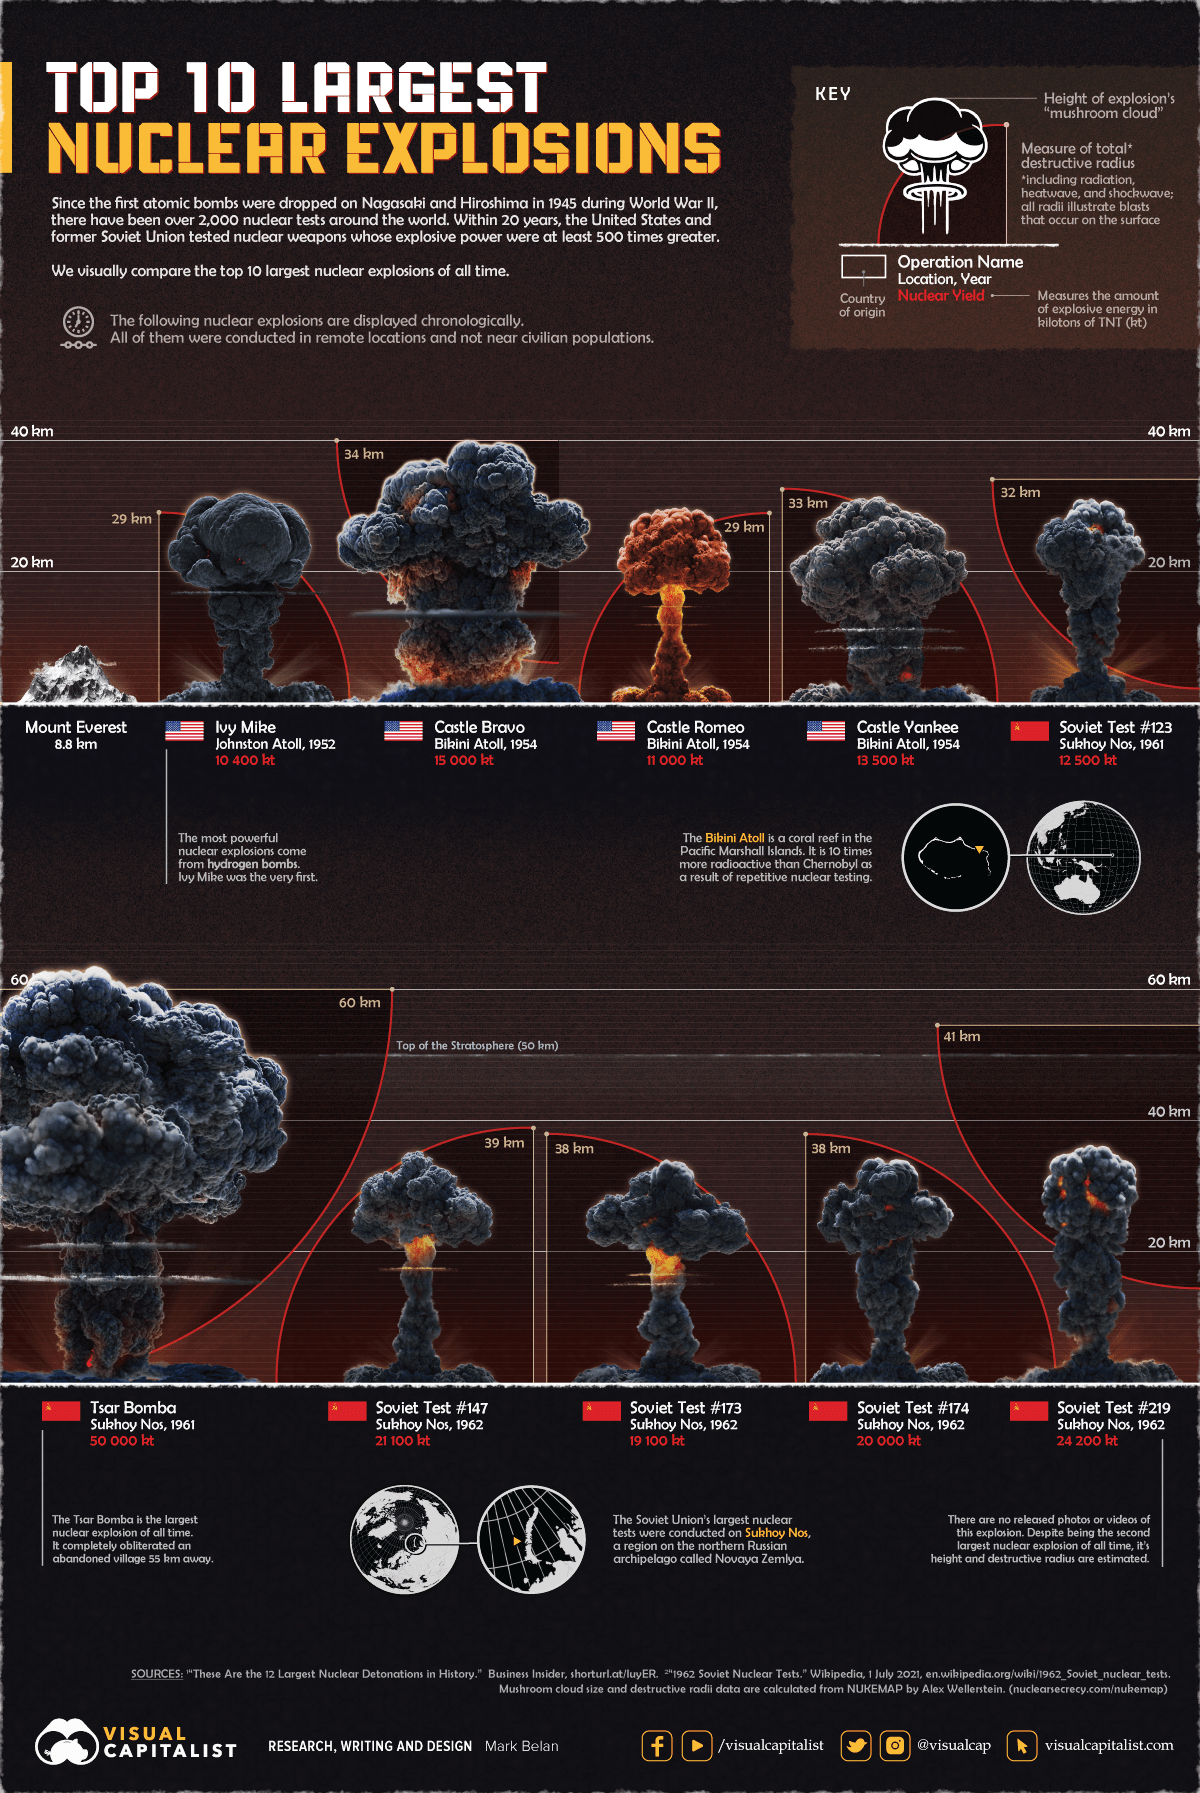 The Top 10 Largest Nuclear Explosions - Infographic